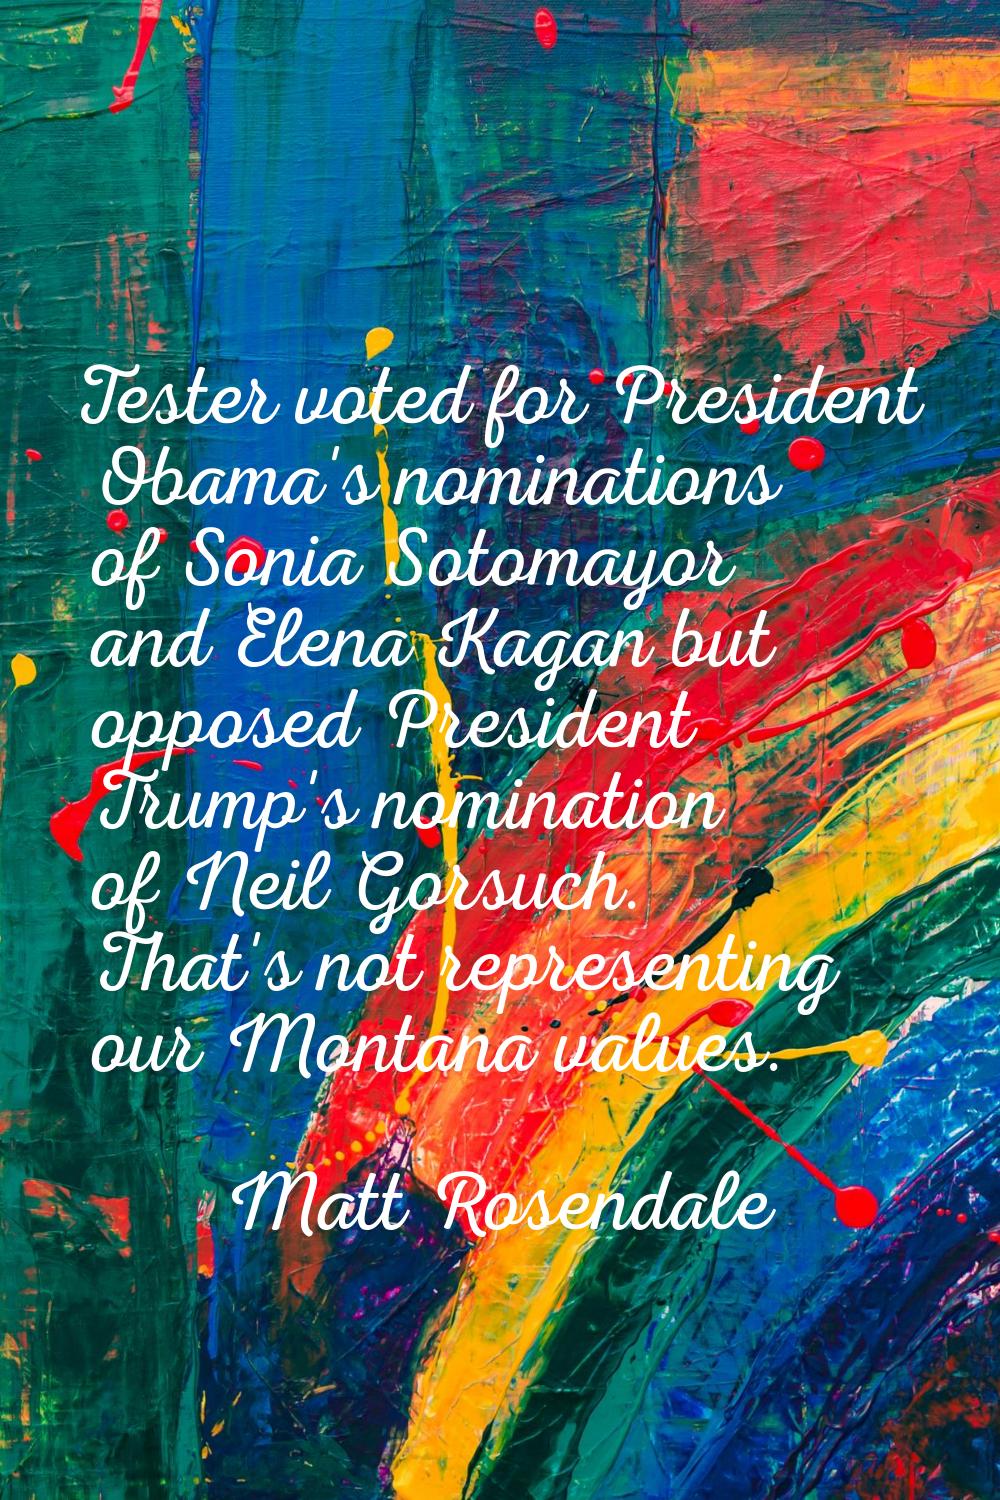 Tester voted for President Obama's nominations of Sonia Sotomayor and Elena Kagan but opposed Presi